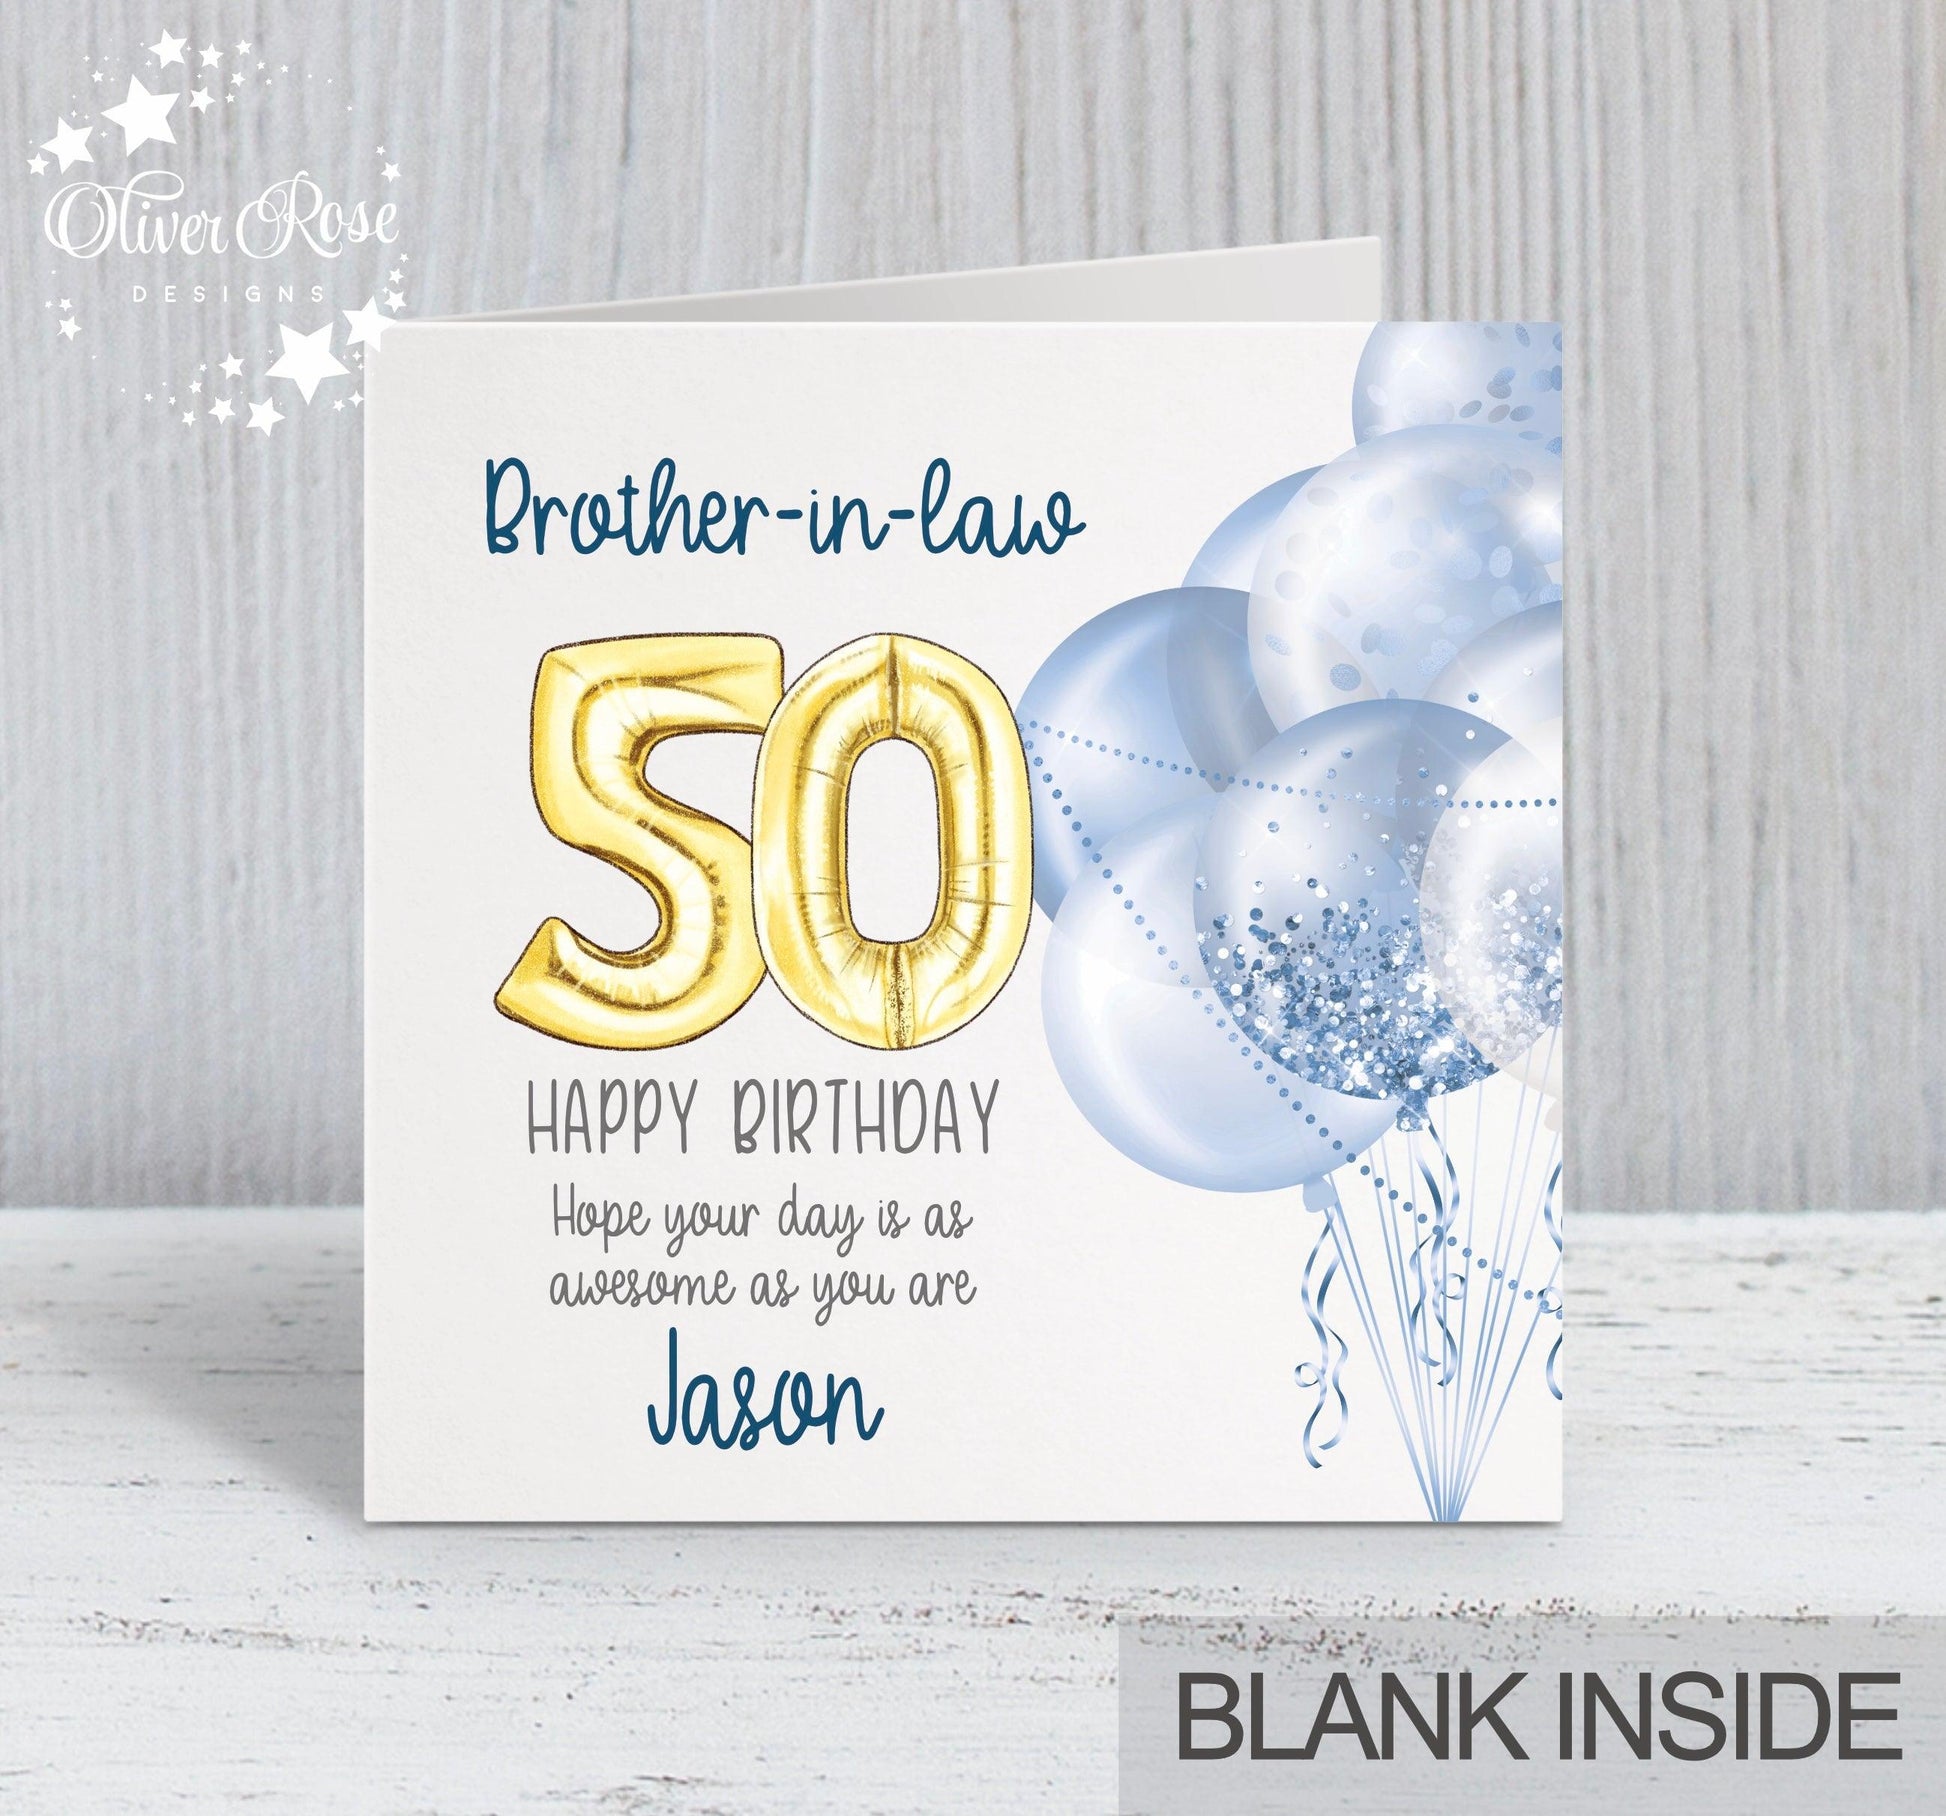 50th Birthday Card Brother-in-law, Blue & Gold Balloons, Personalised with name, Happy Birthday, Hope your day is as awesome as you are! 5.75" square Blank Inside